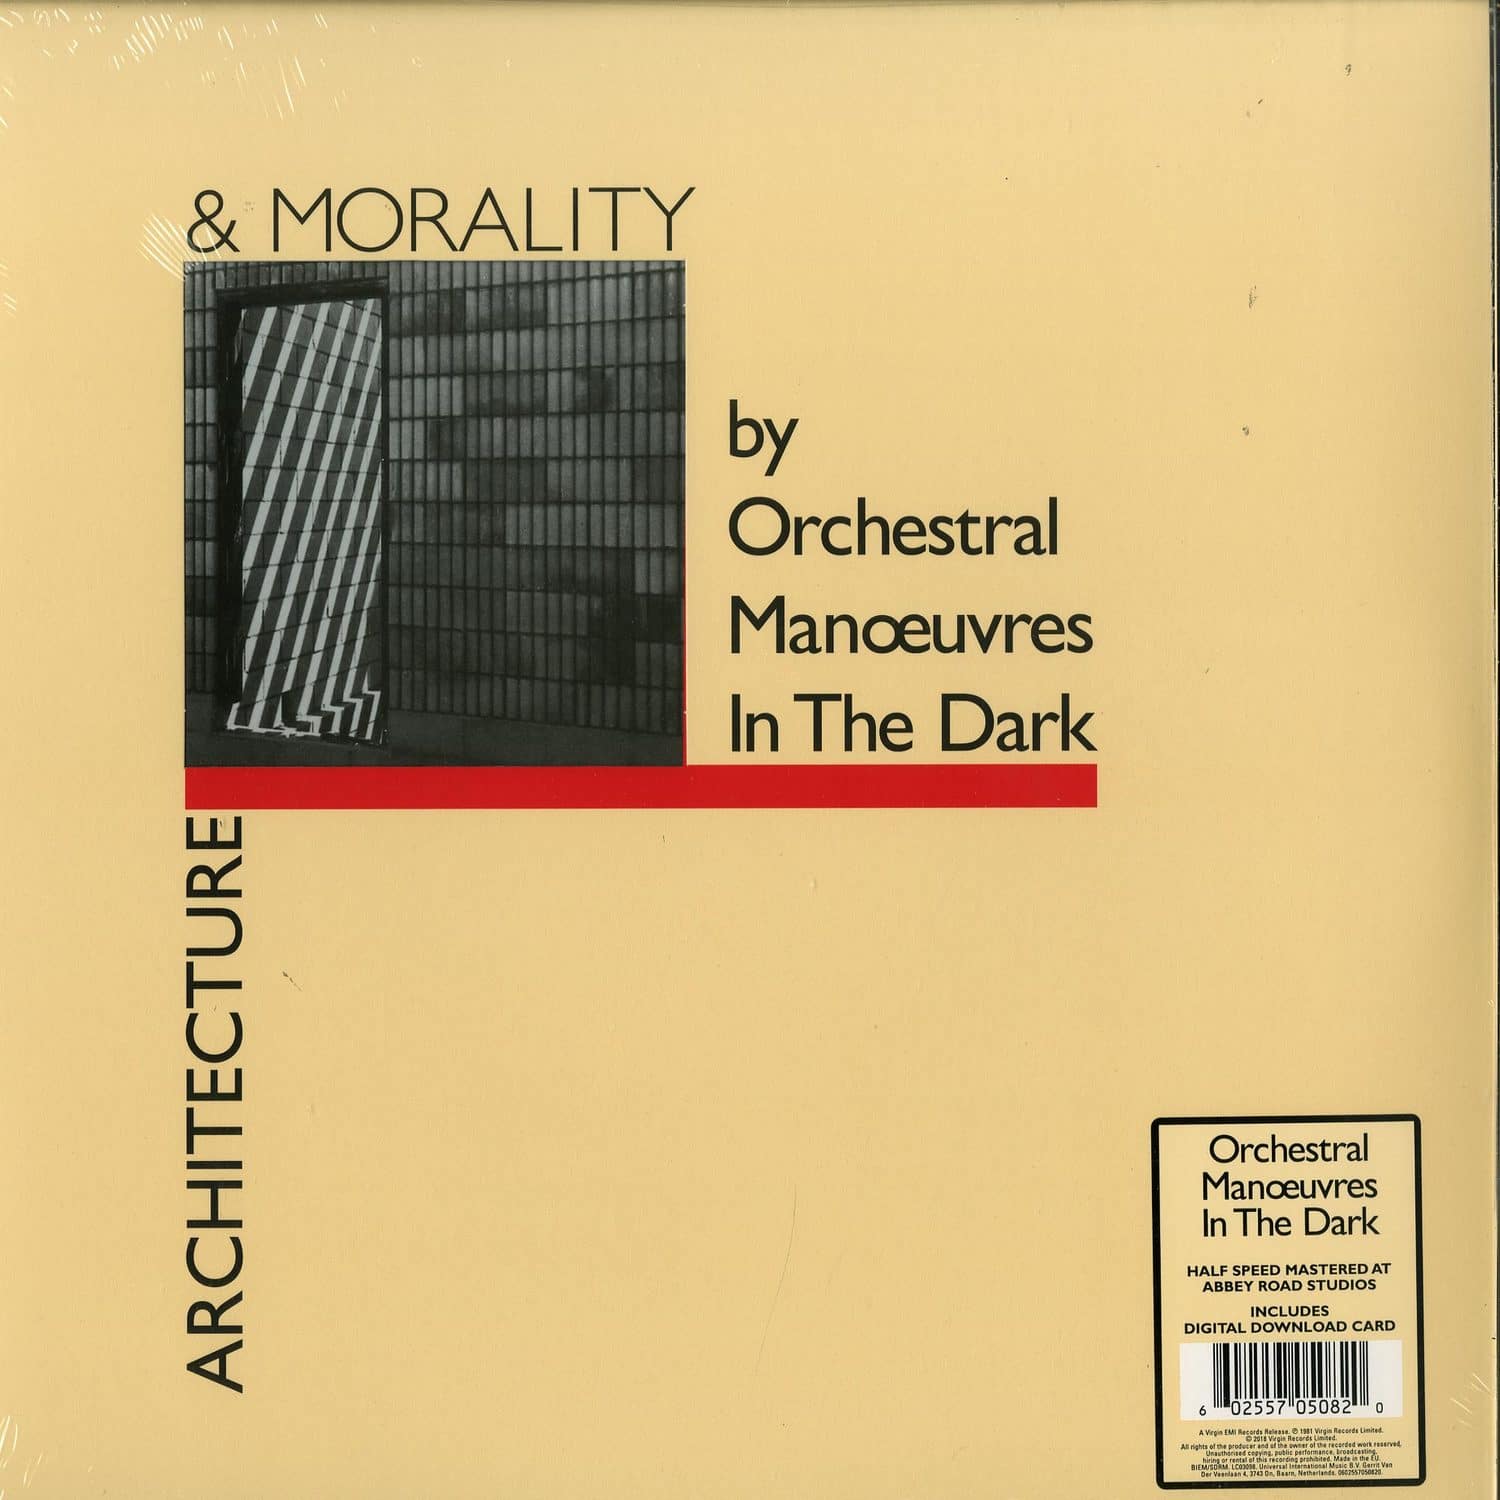 Orchestral Manoeuvres In The Dark - ARCHITECTURE & MORALITY 